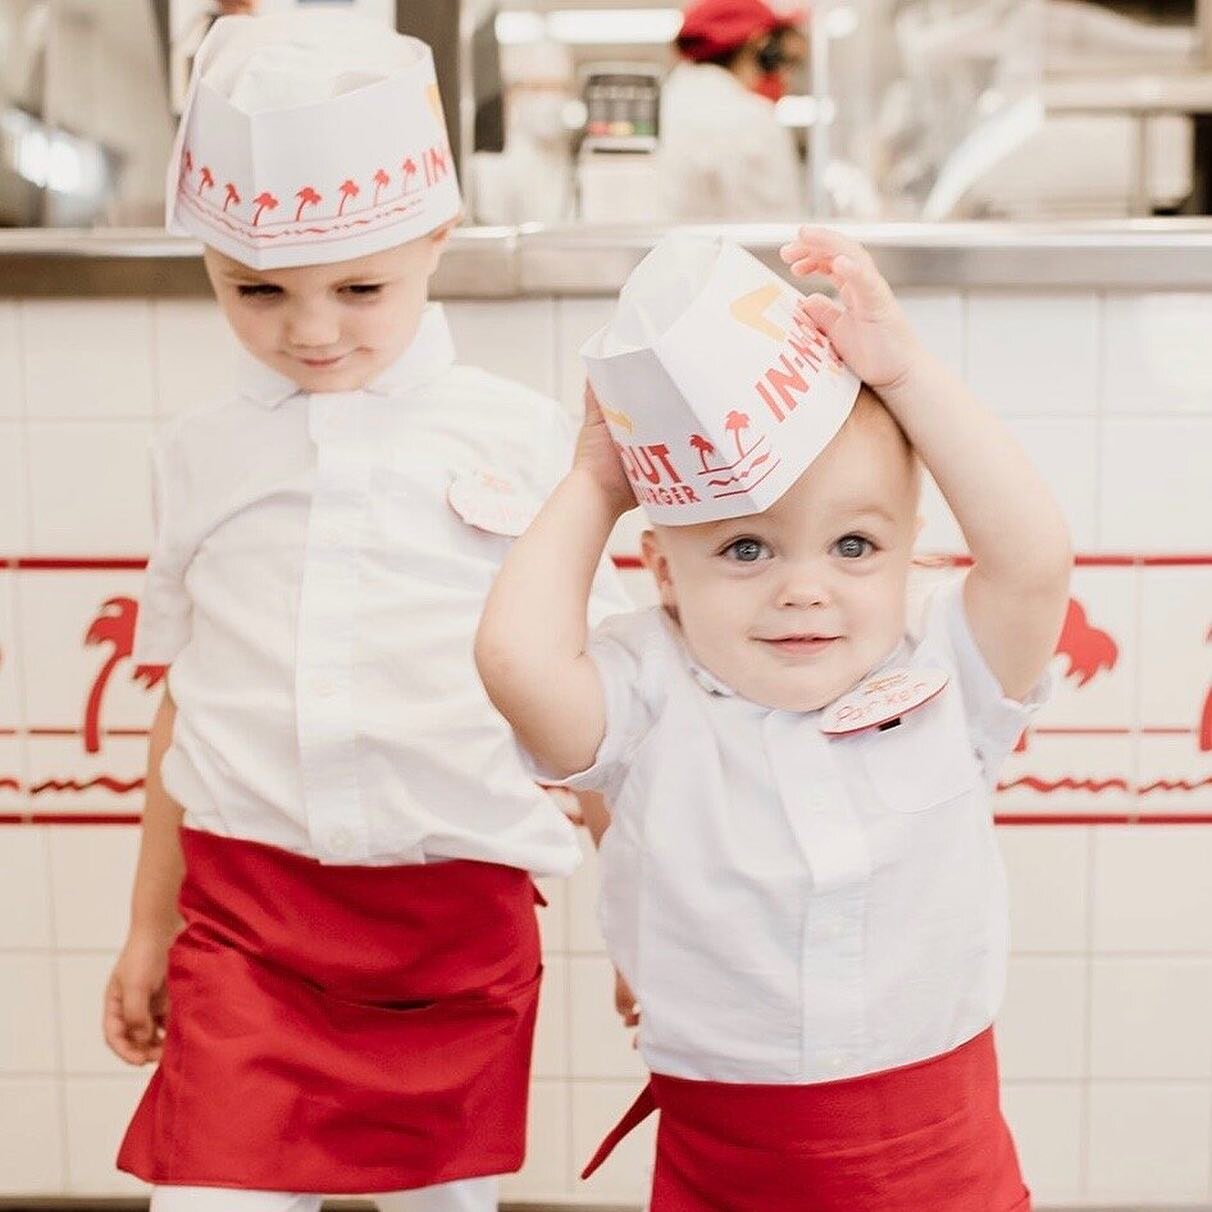 We took some photos at our favorite place! 🍔 🍟 
Thanks so much Christie for the photos! 
Check out my blog to see some of our favorites ❤️❤️❤️
https://www.laurenloveshomes.com/blog/in-n-out-family-photoshoot

📸 @momentsandmountainsphotography

.
.